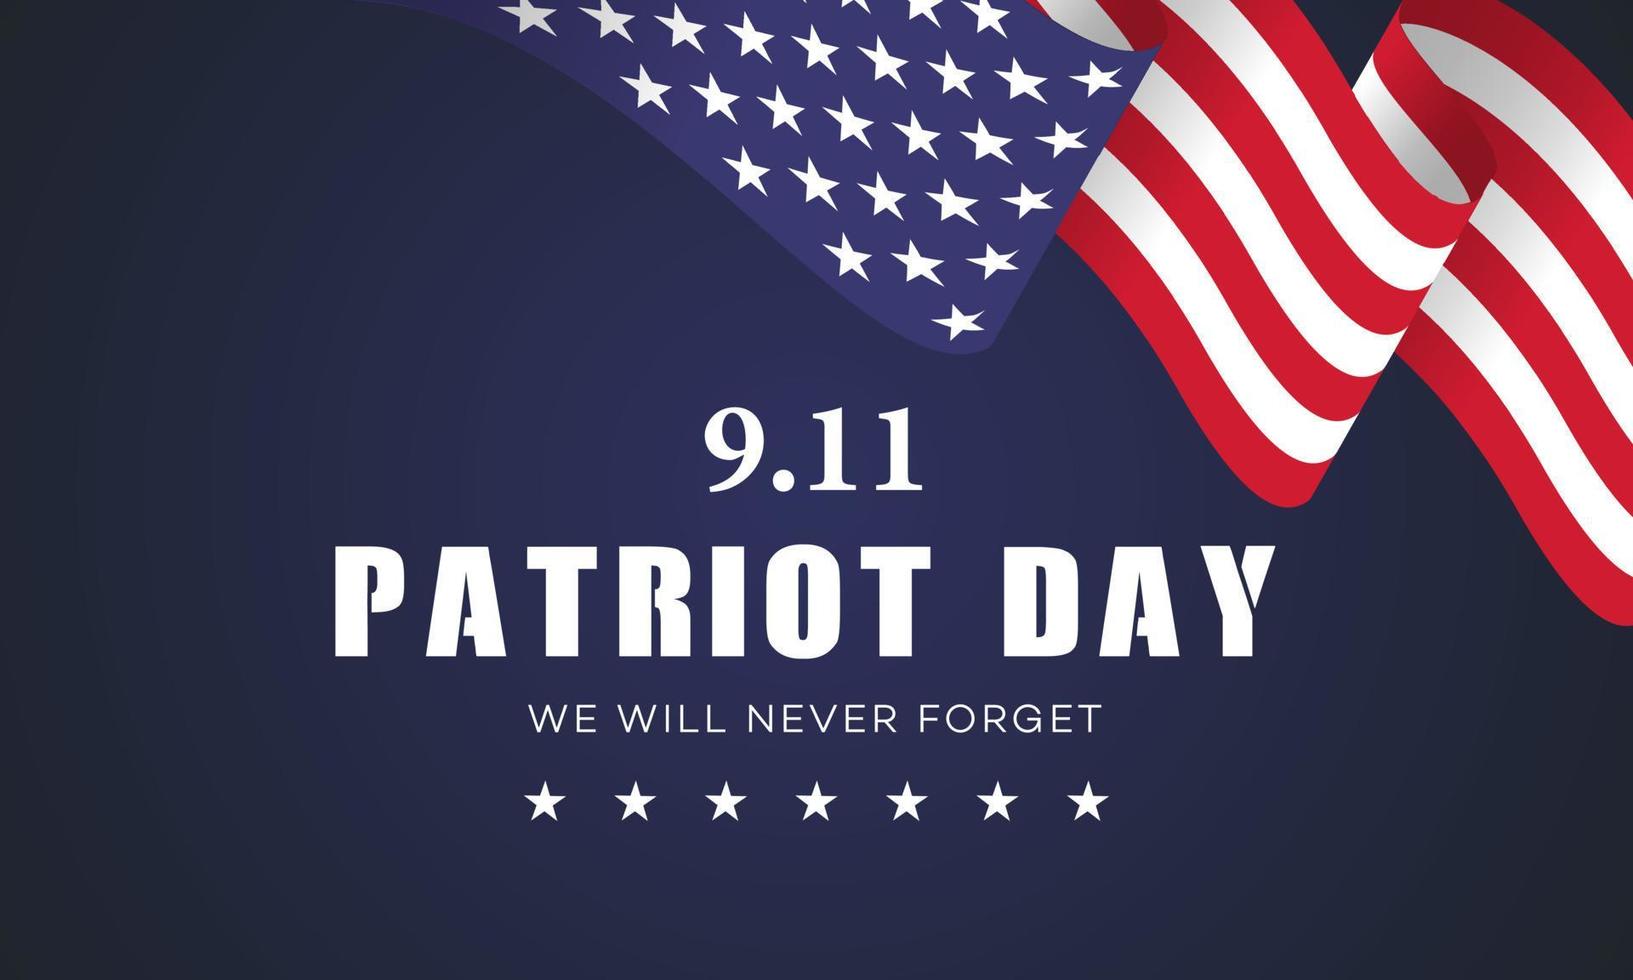 Patriot day USA Never forget 9.11 vector poster - vector Illustration